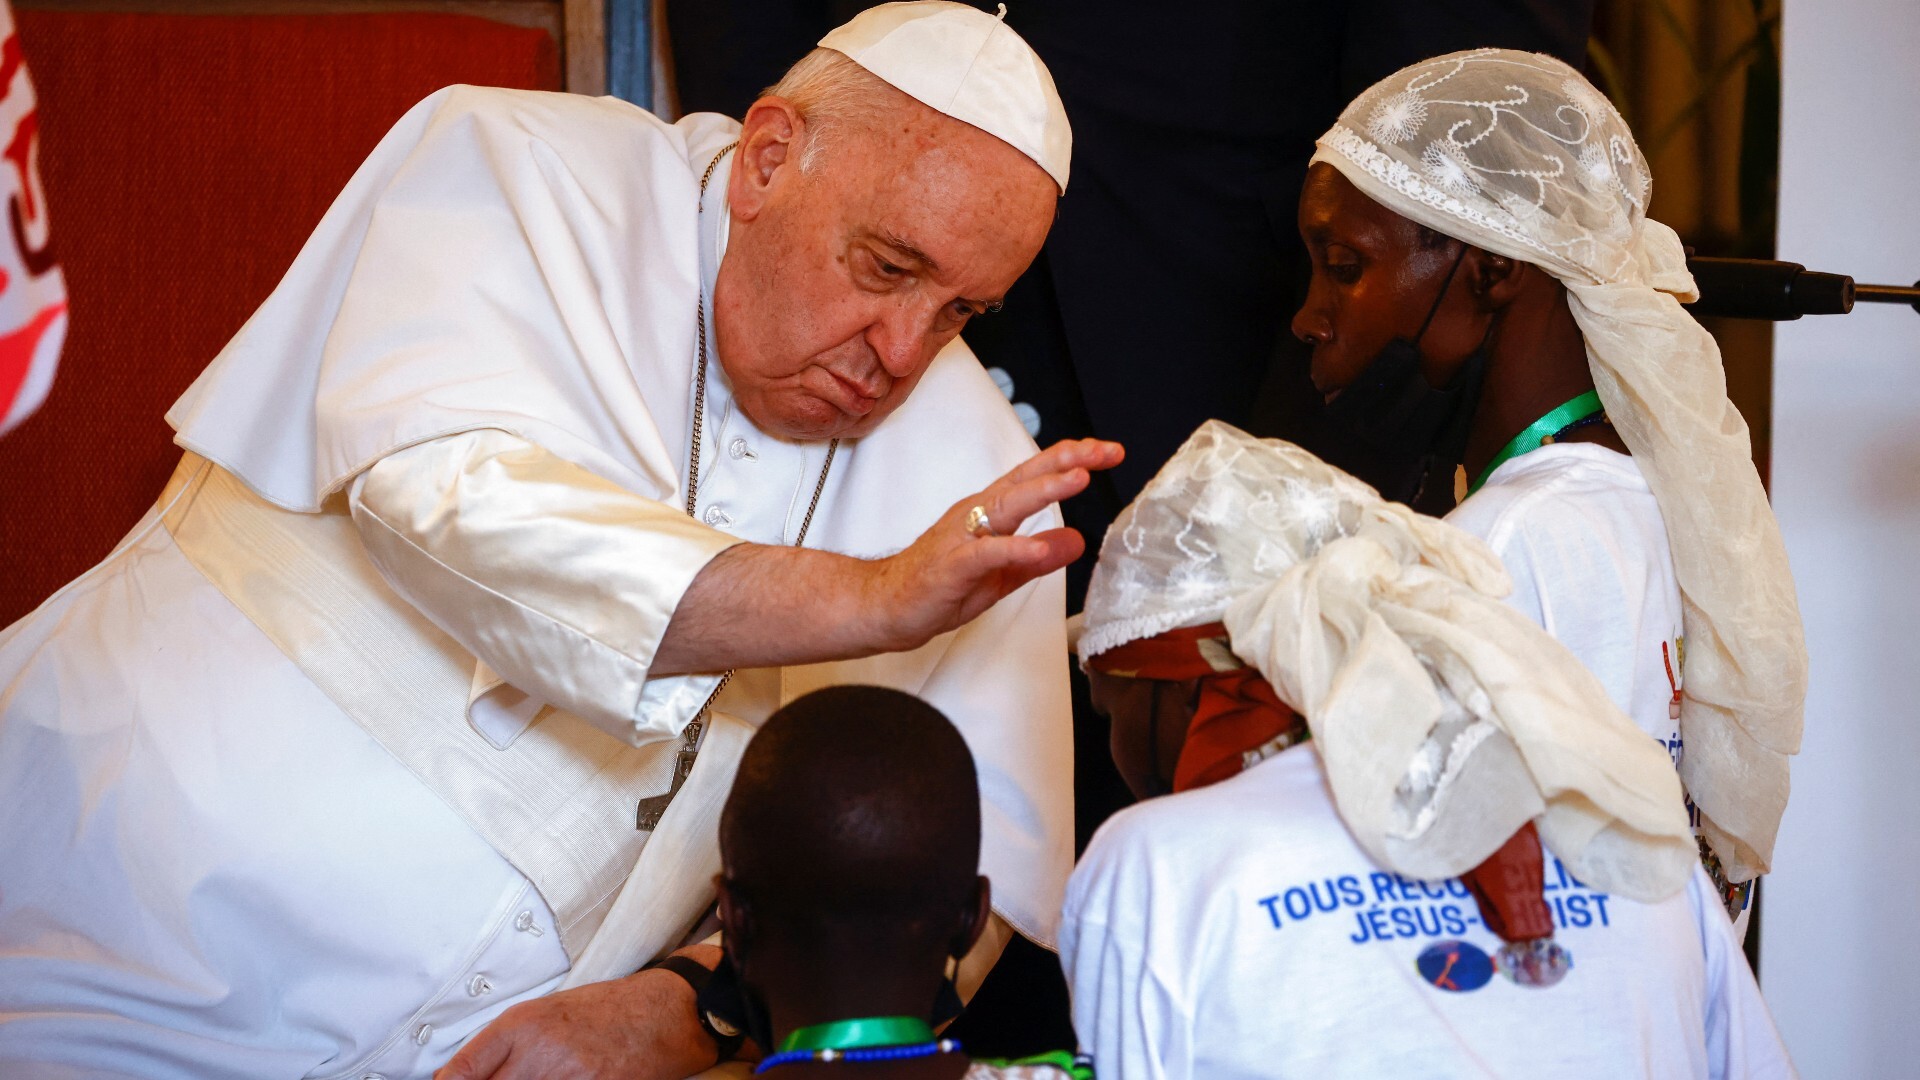 How can Pope Francis’s visit to Africa help the continent?